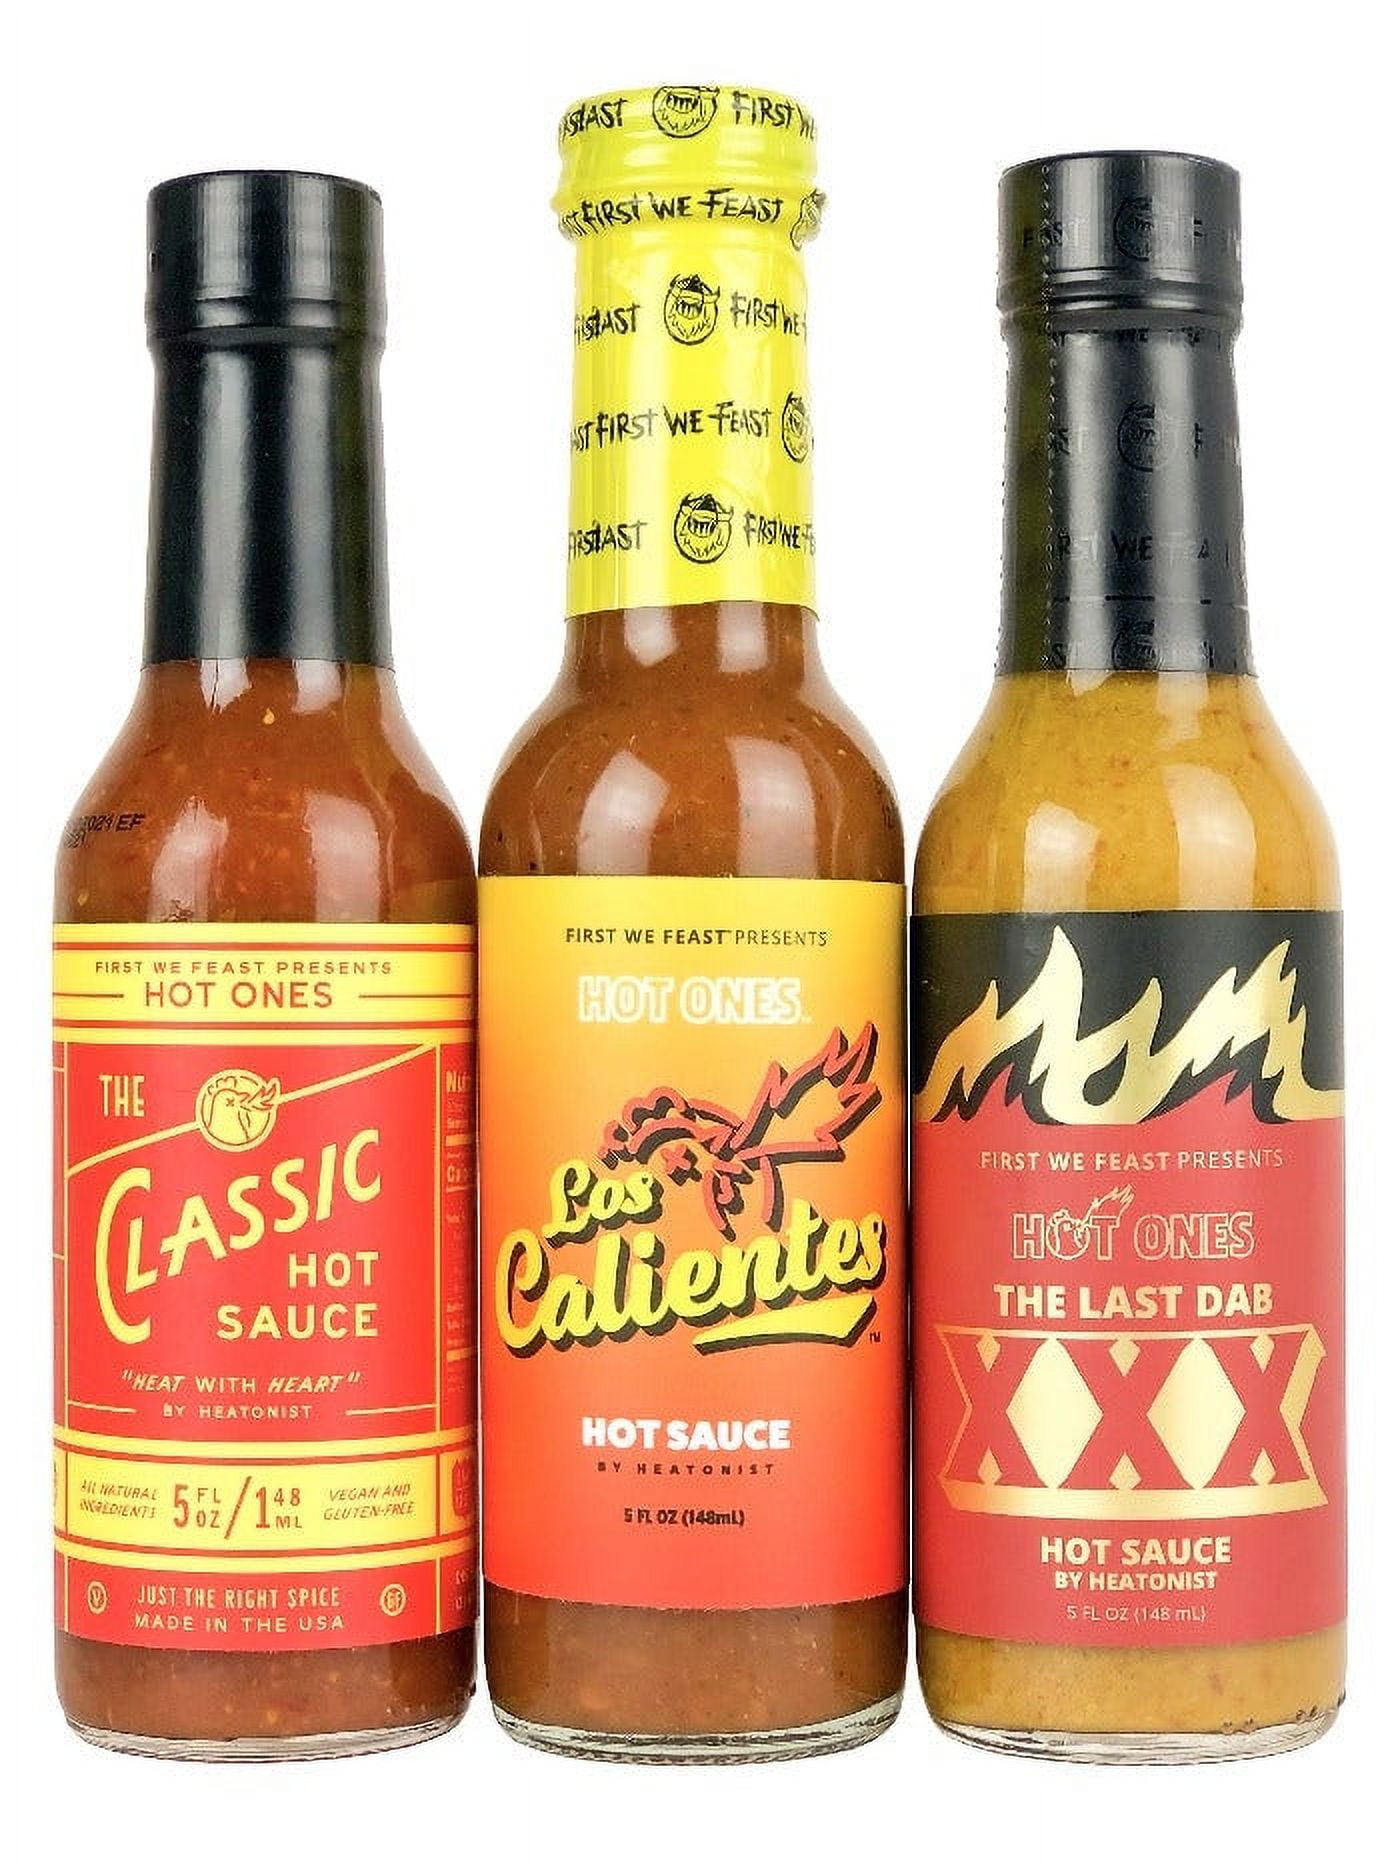 Hot Ones Season 20 Lineup, Hot Sauce Challenge Kit Made with